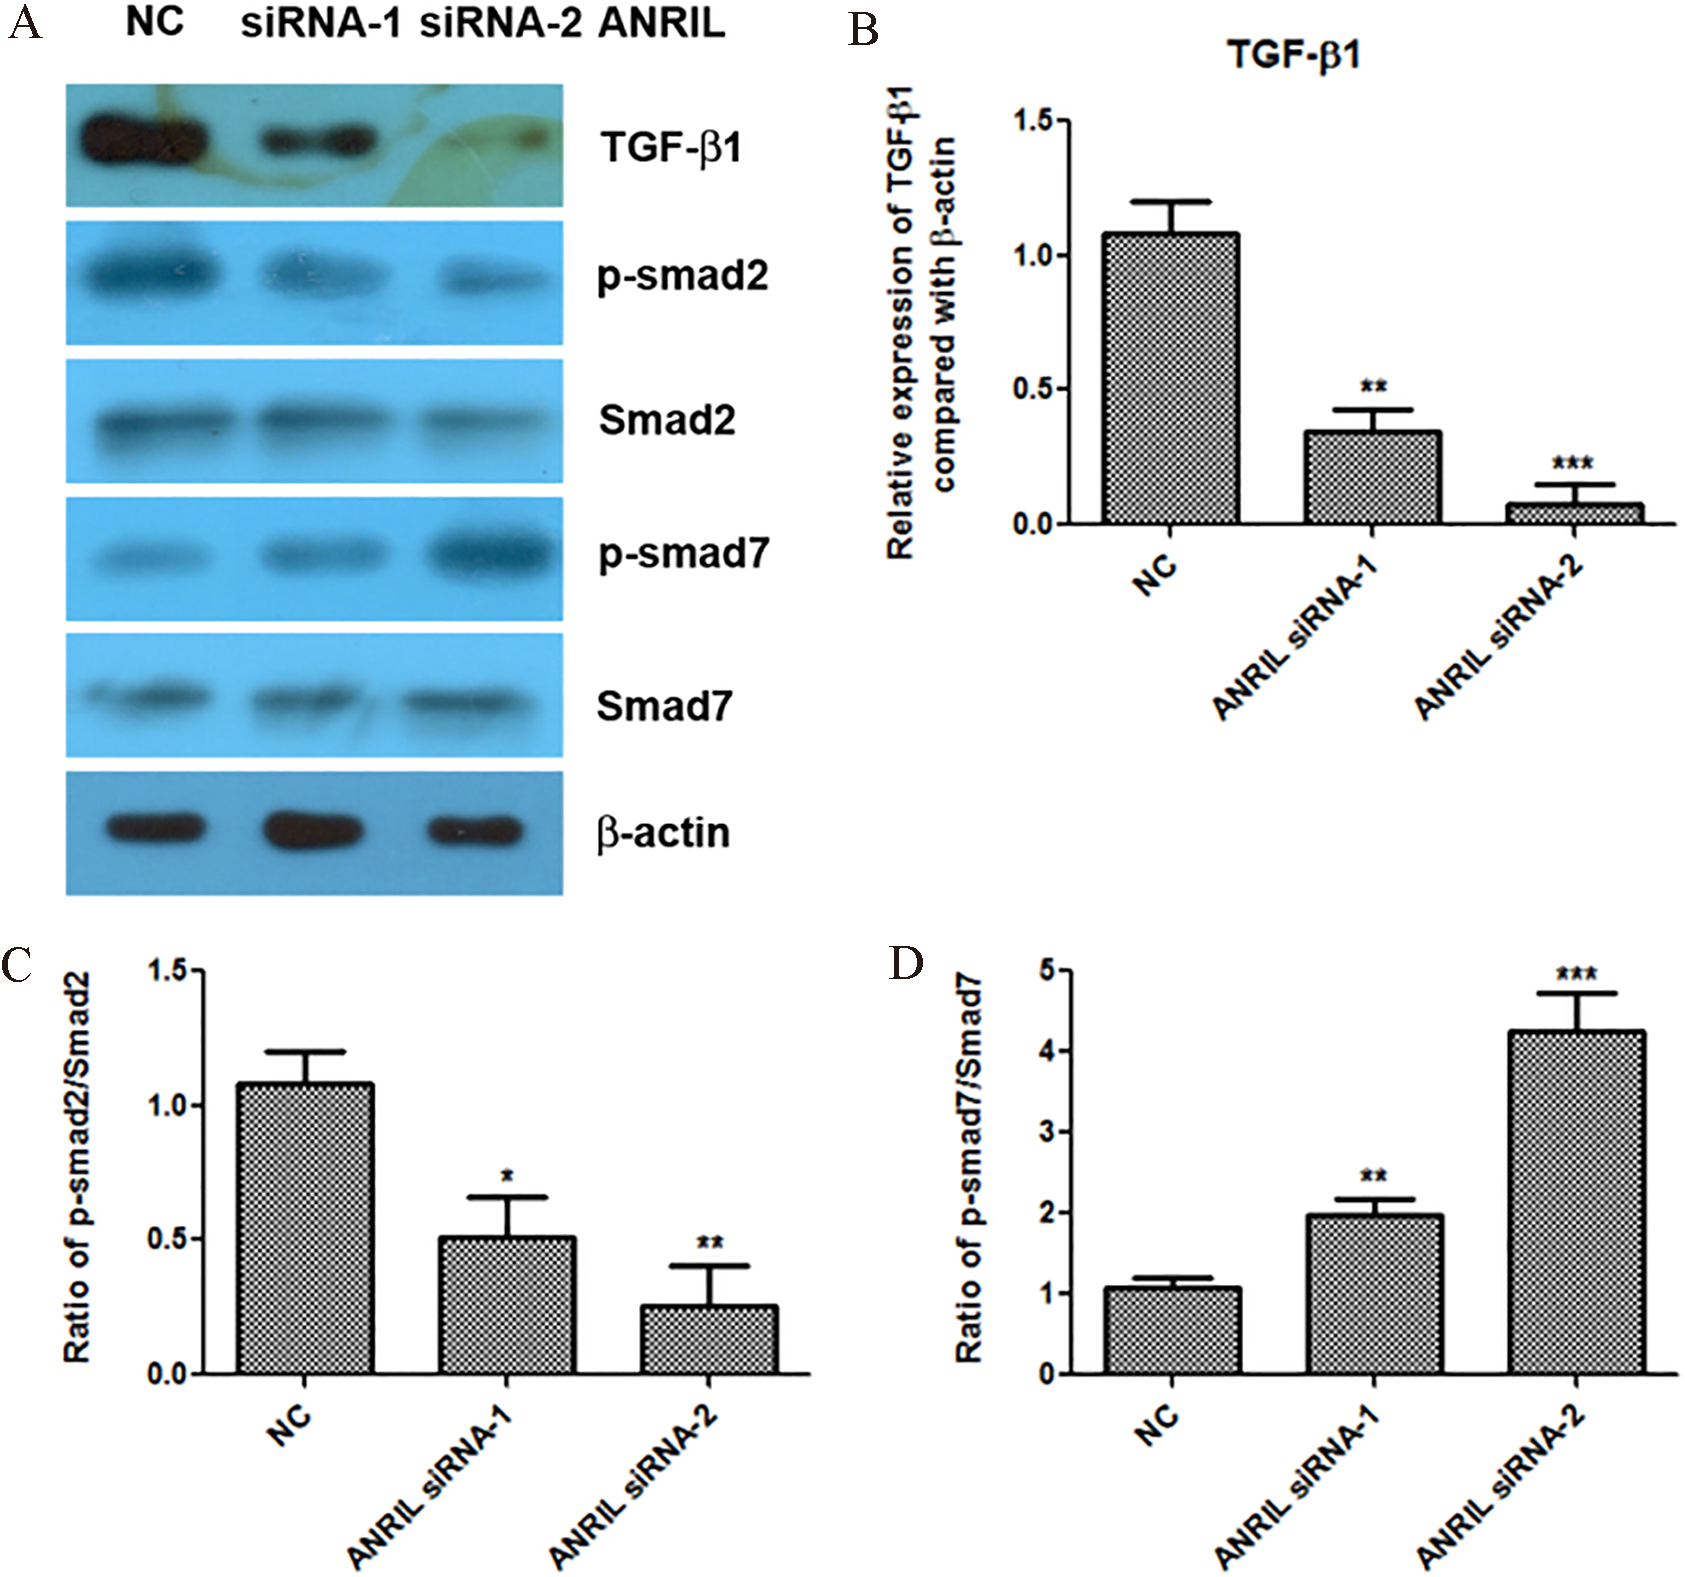 Knockdown of lncRNA ANRIL inactivates the TGF-β1/Smad signaling pathway. A to D. Effect of ANRIL siRNAs on the expression levels of TGF-β1, p-smad2, smad2, p-smad7 and smad7 detected by western blotting assay, and statistical analysis was done using Student’s test. *, P< 0.05; **, P< 0.01; *⁣**, P< 0.001.